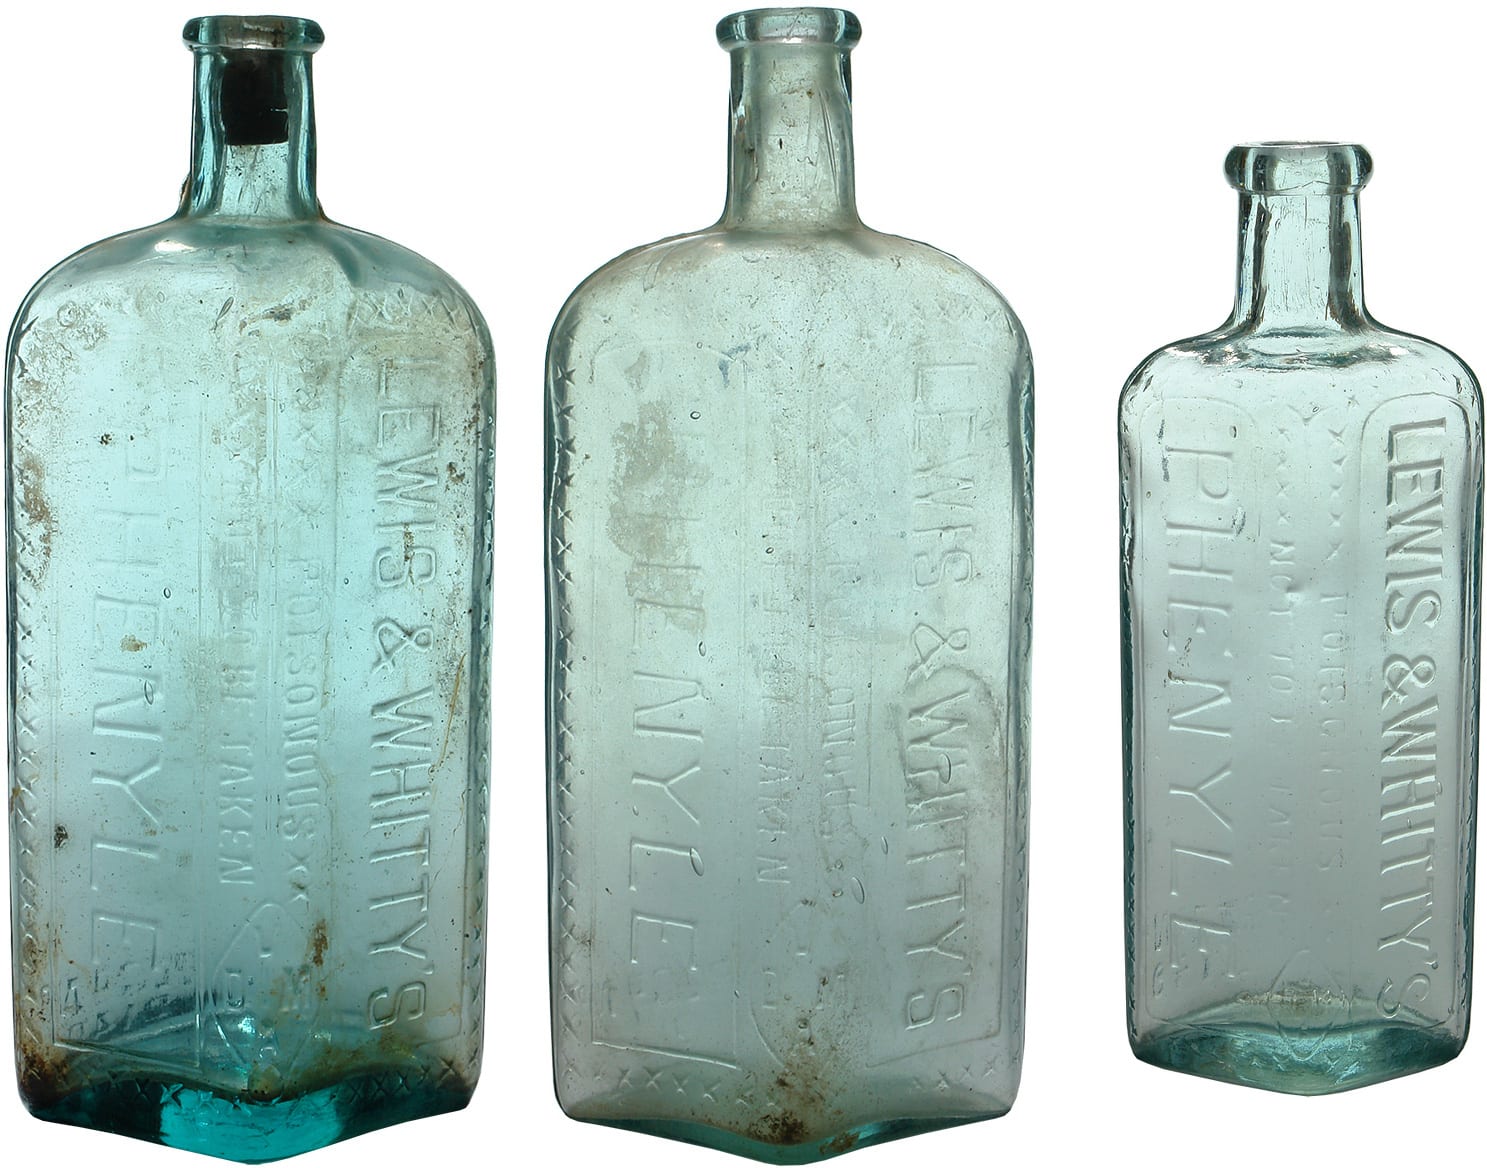 Collection Old Phenyle Poison Bottles